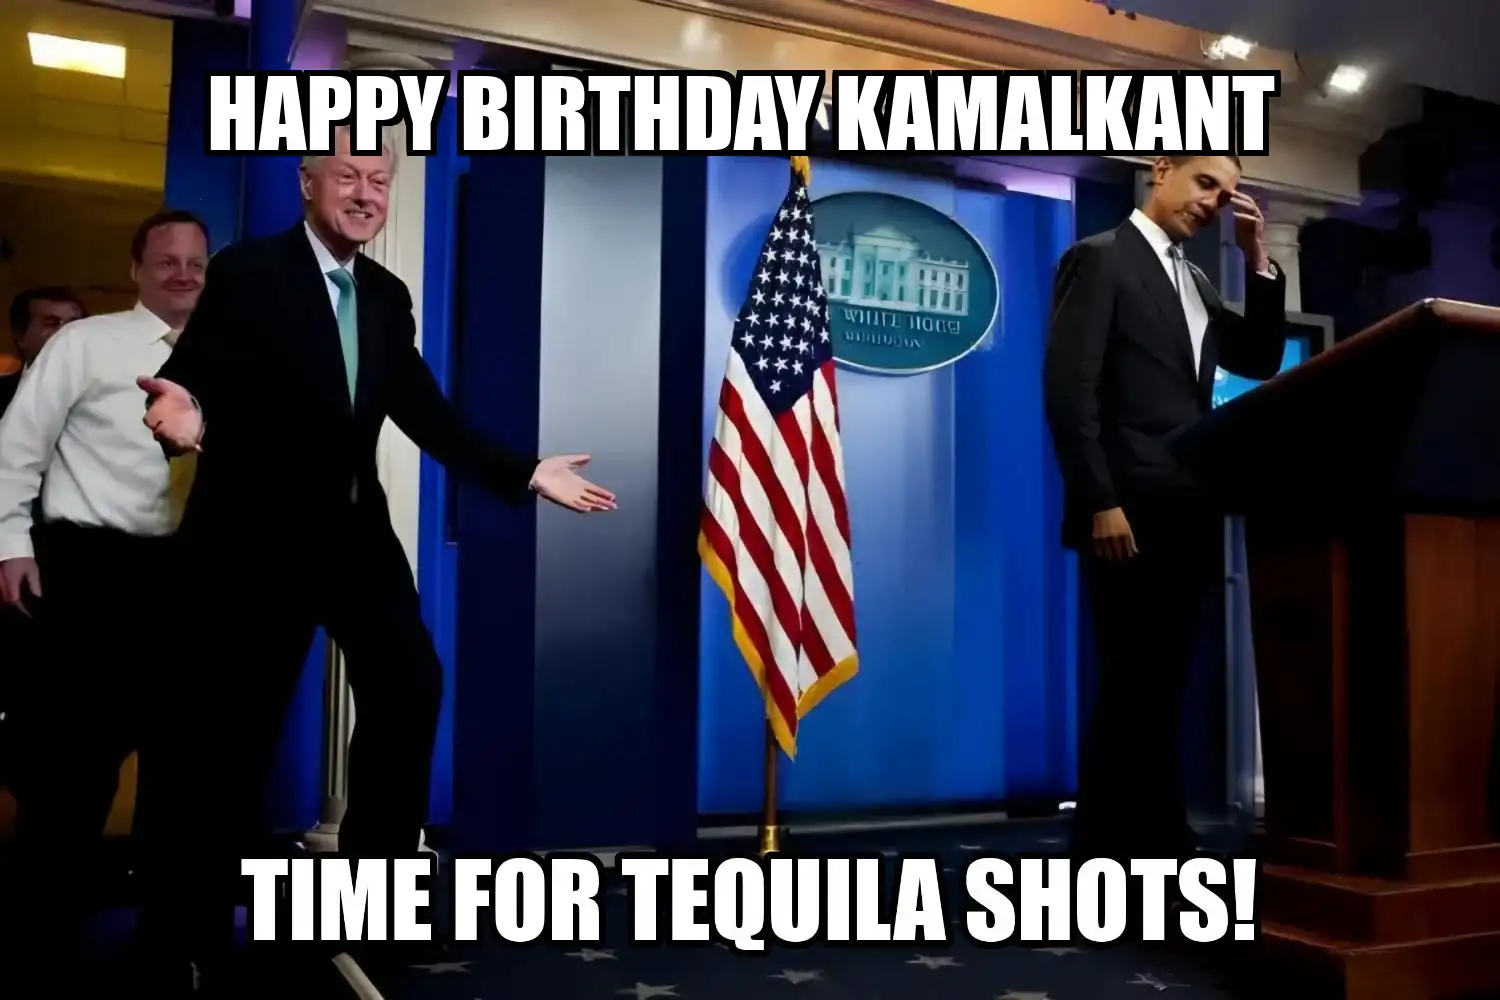 Happy Birthday Kamalkant Time For Tequila Shots Memes